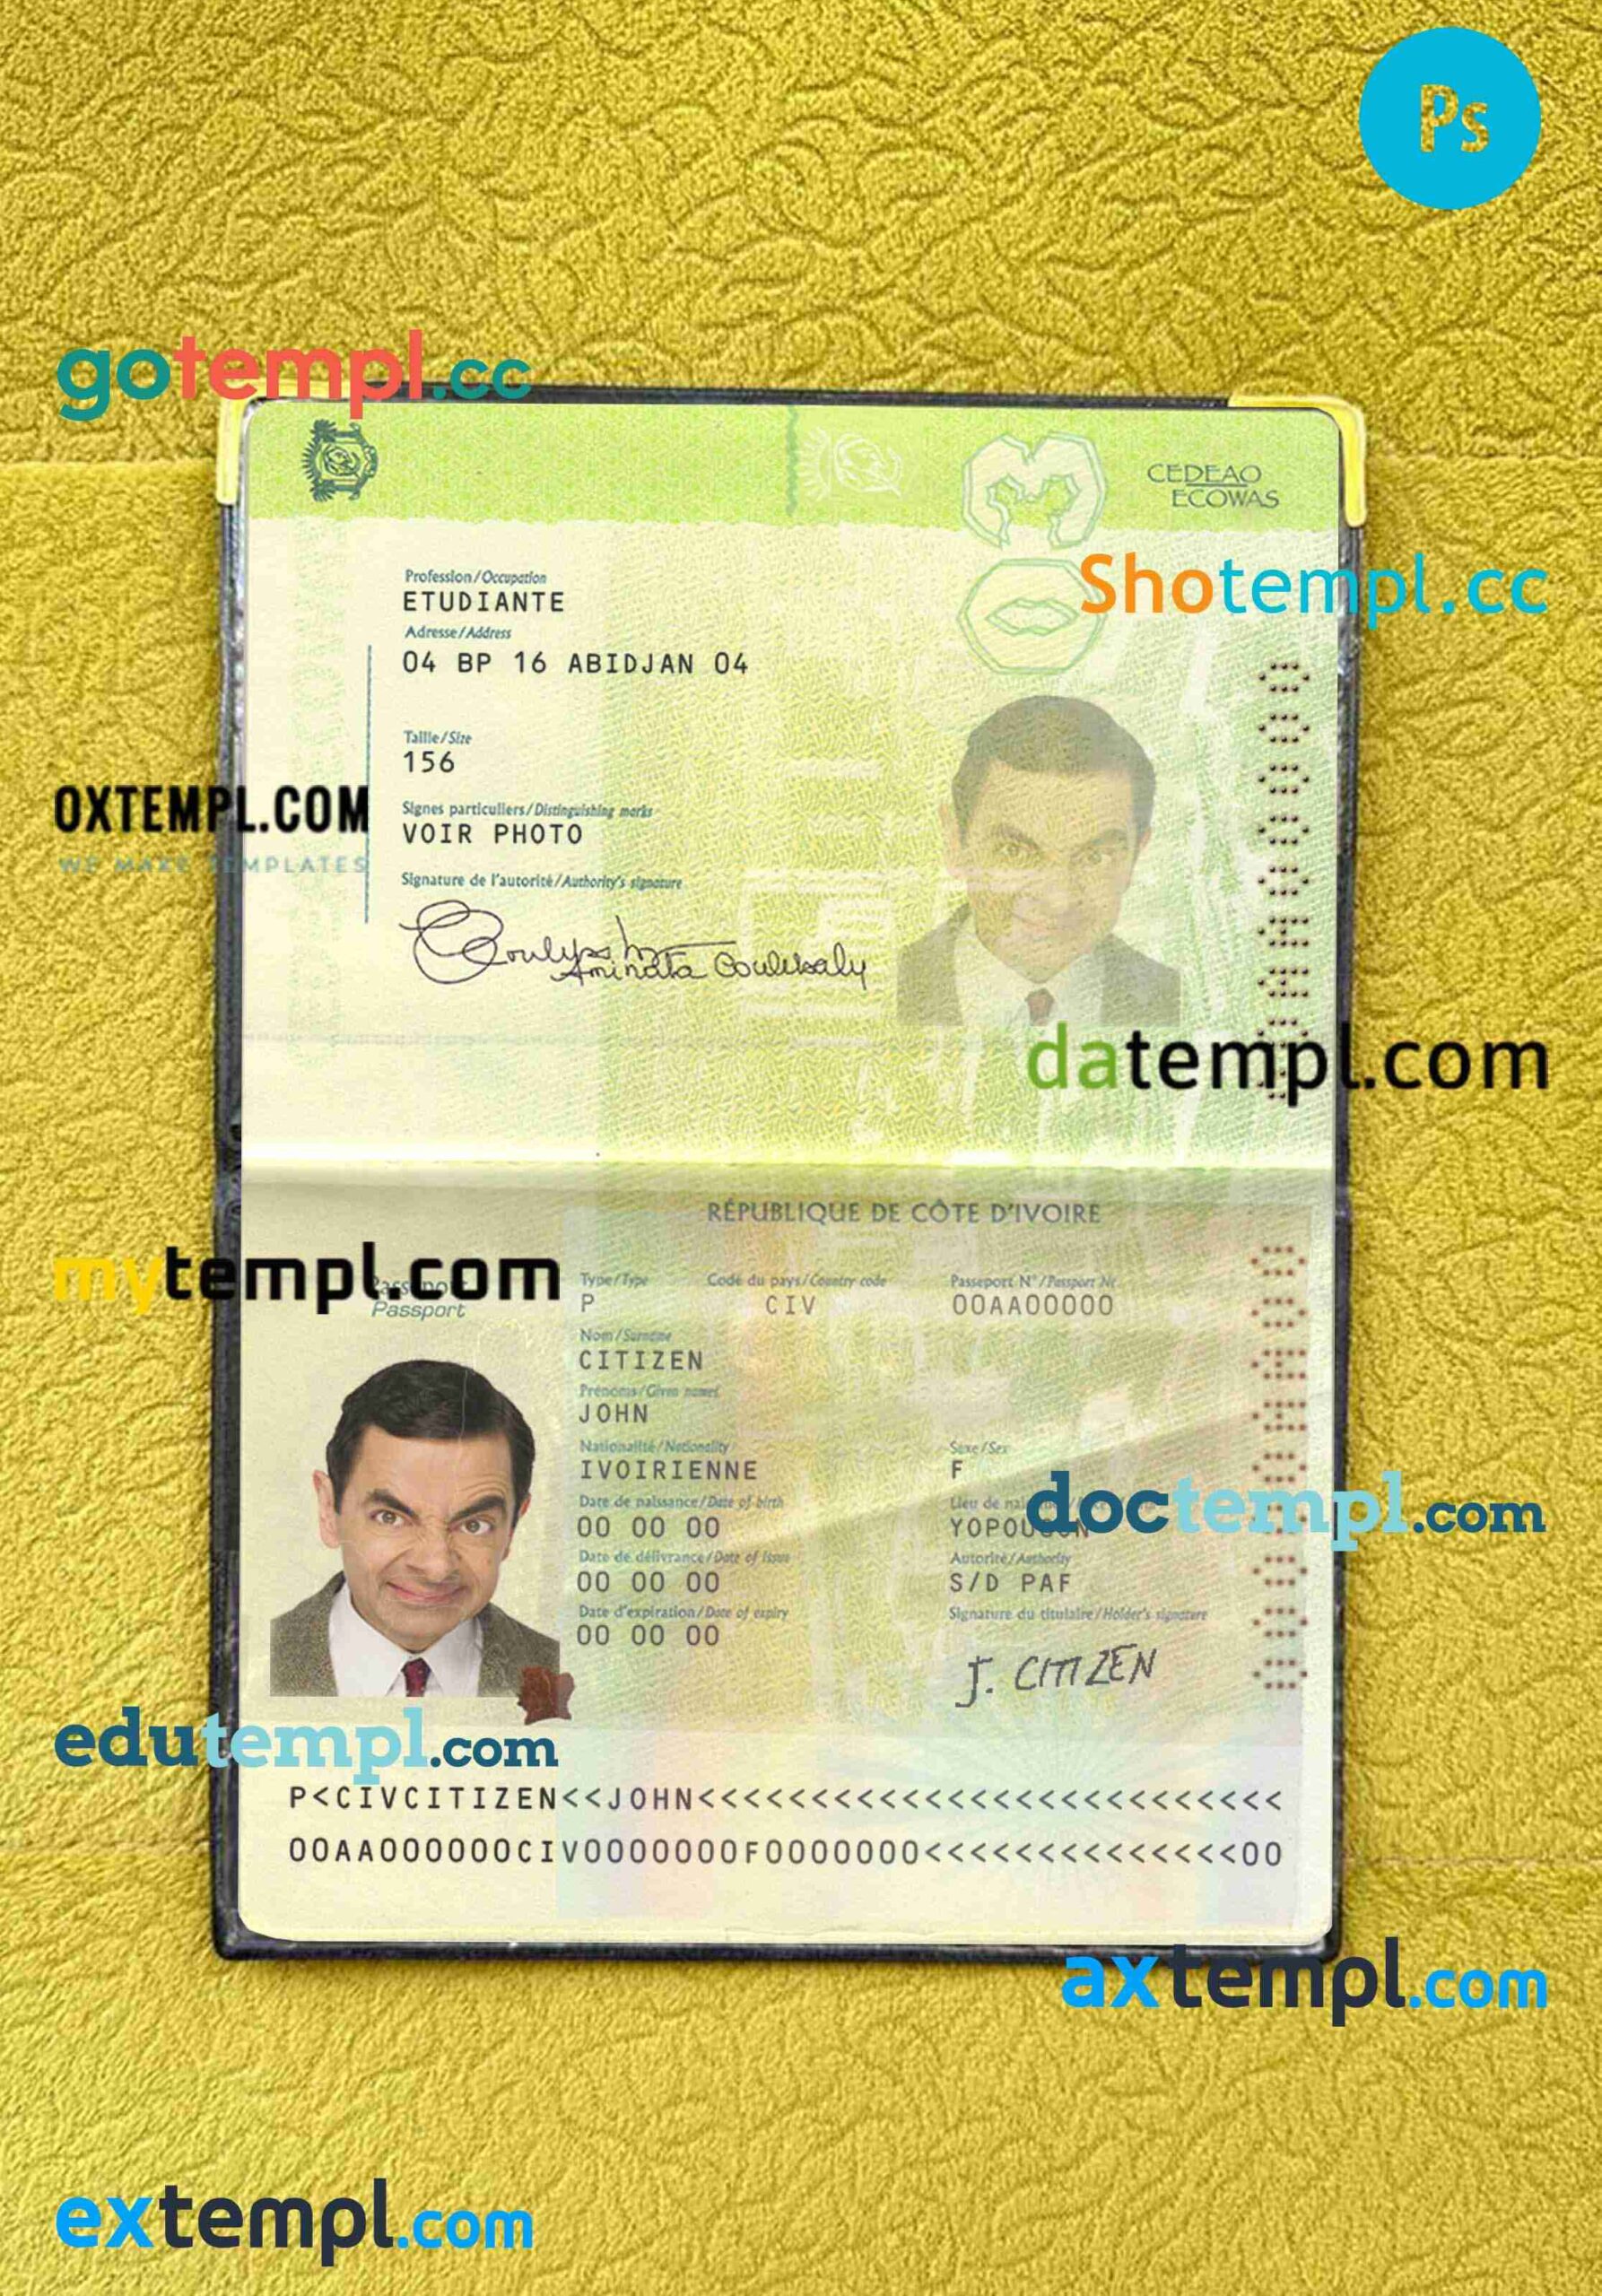 Cote D'lvoire passport PSD files, scan and photo look templates, 2 in 1